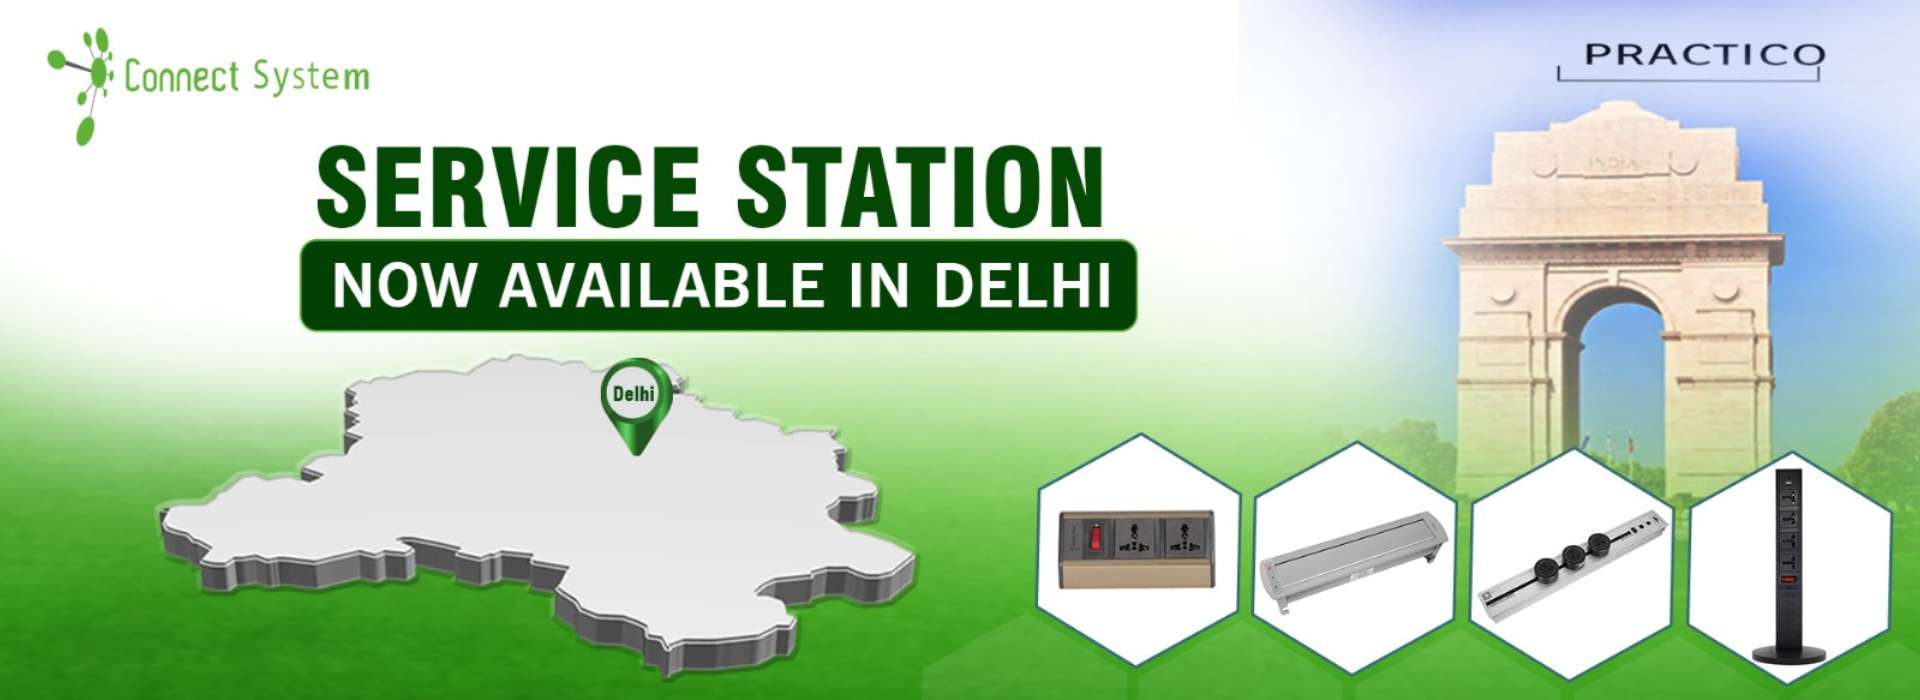 connect system service station available in delhi